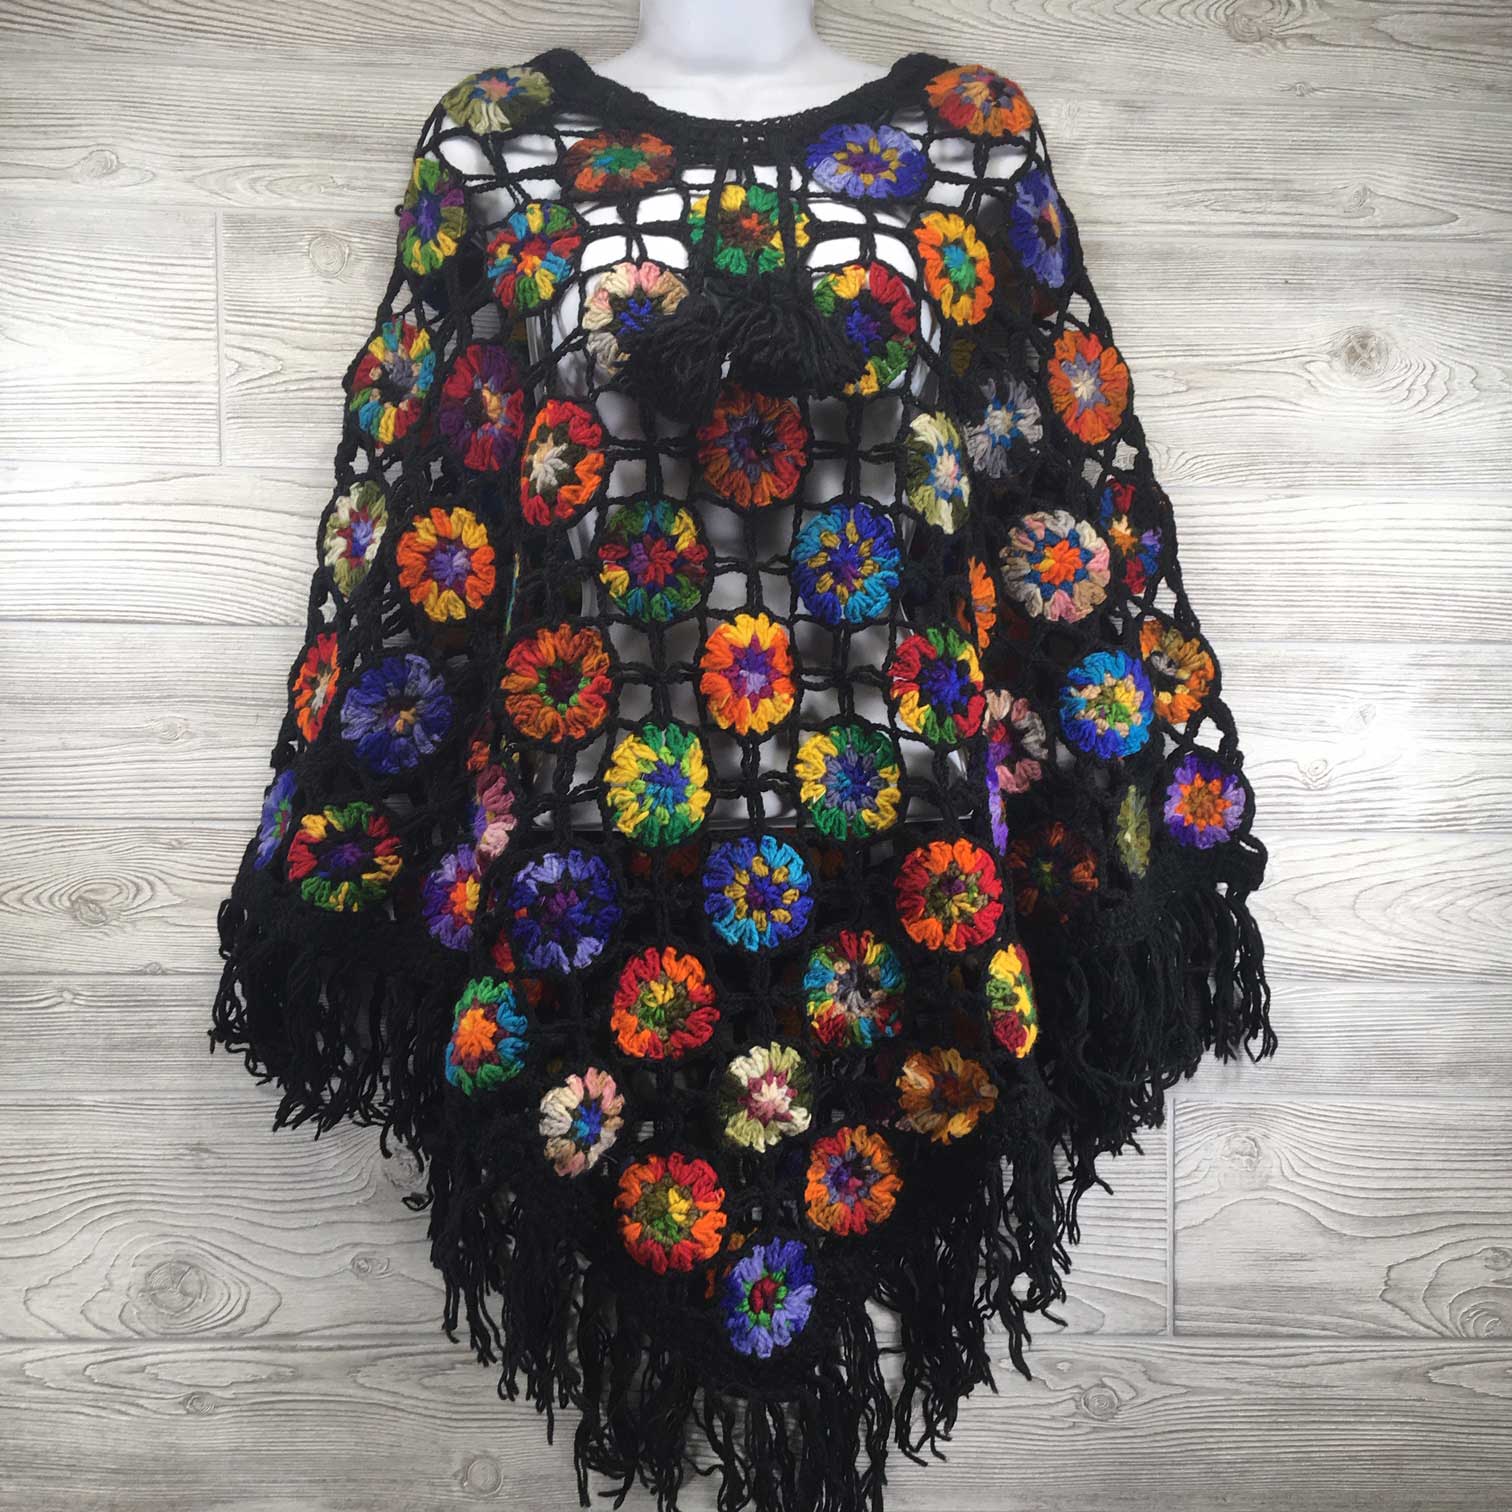 Amadara Women's Crochet Granny Square Boho Wool Poncho with Fringes - One Size Fits Small to Medium - Multicolored Black2